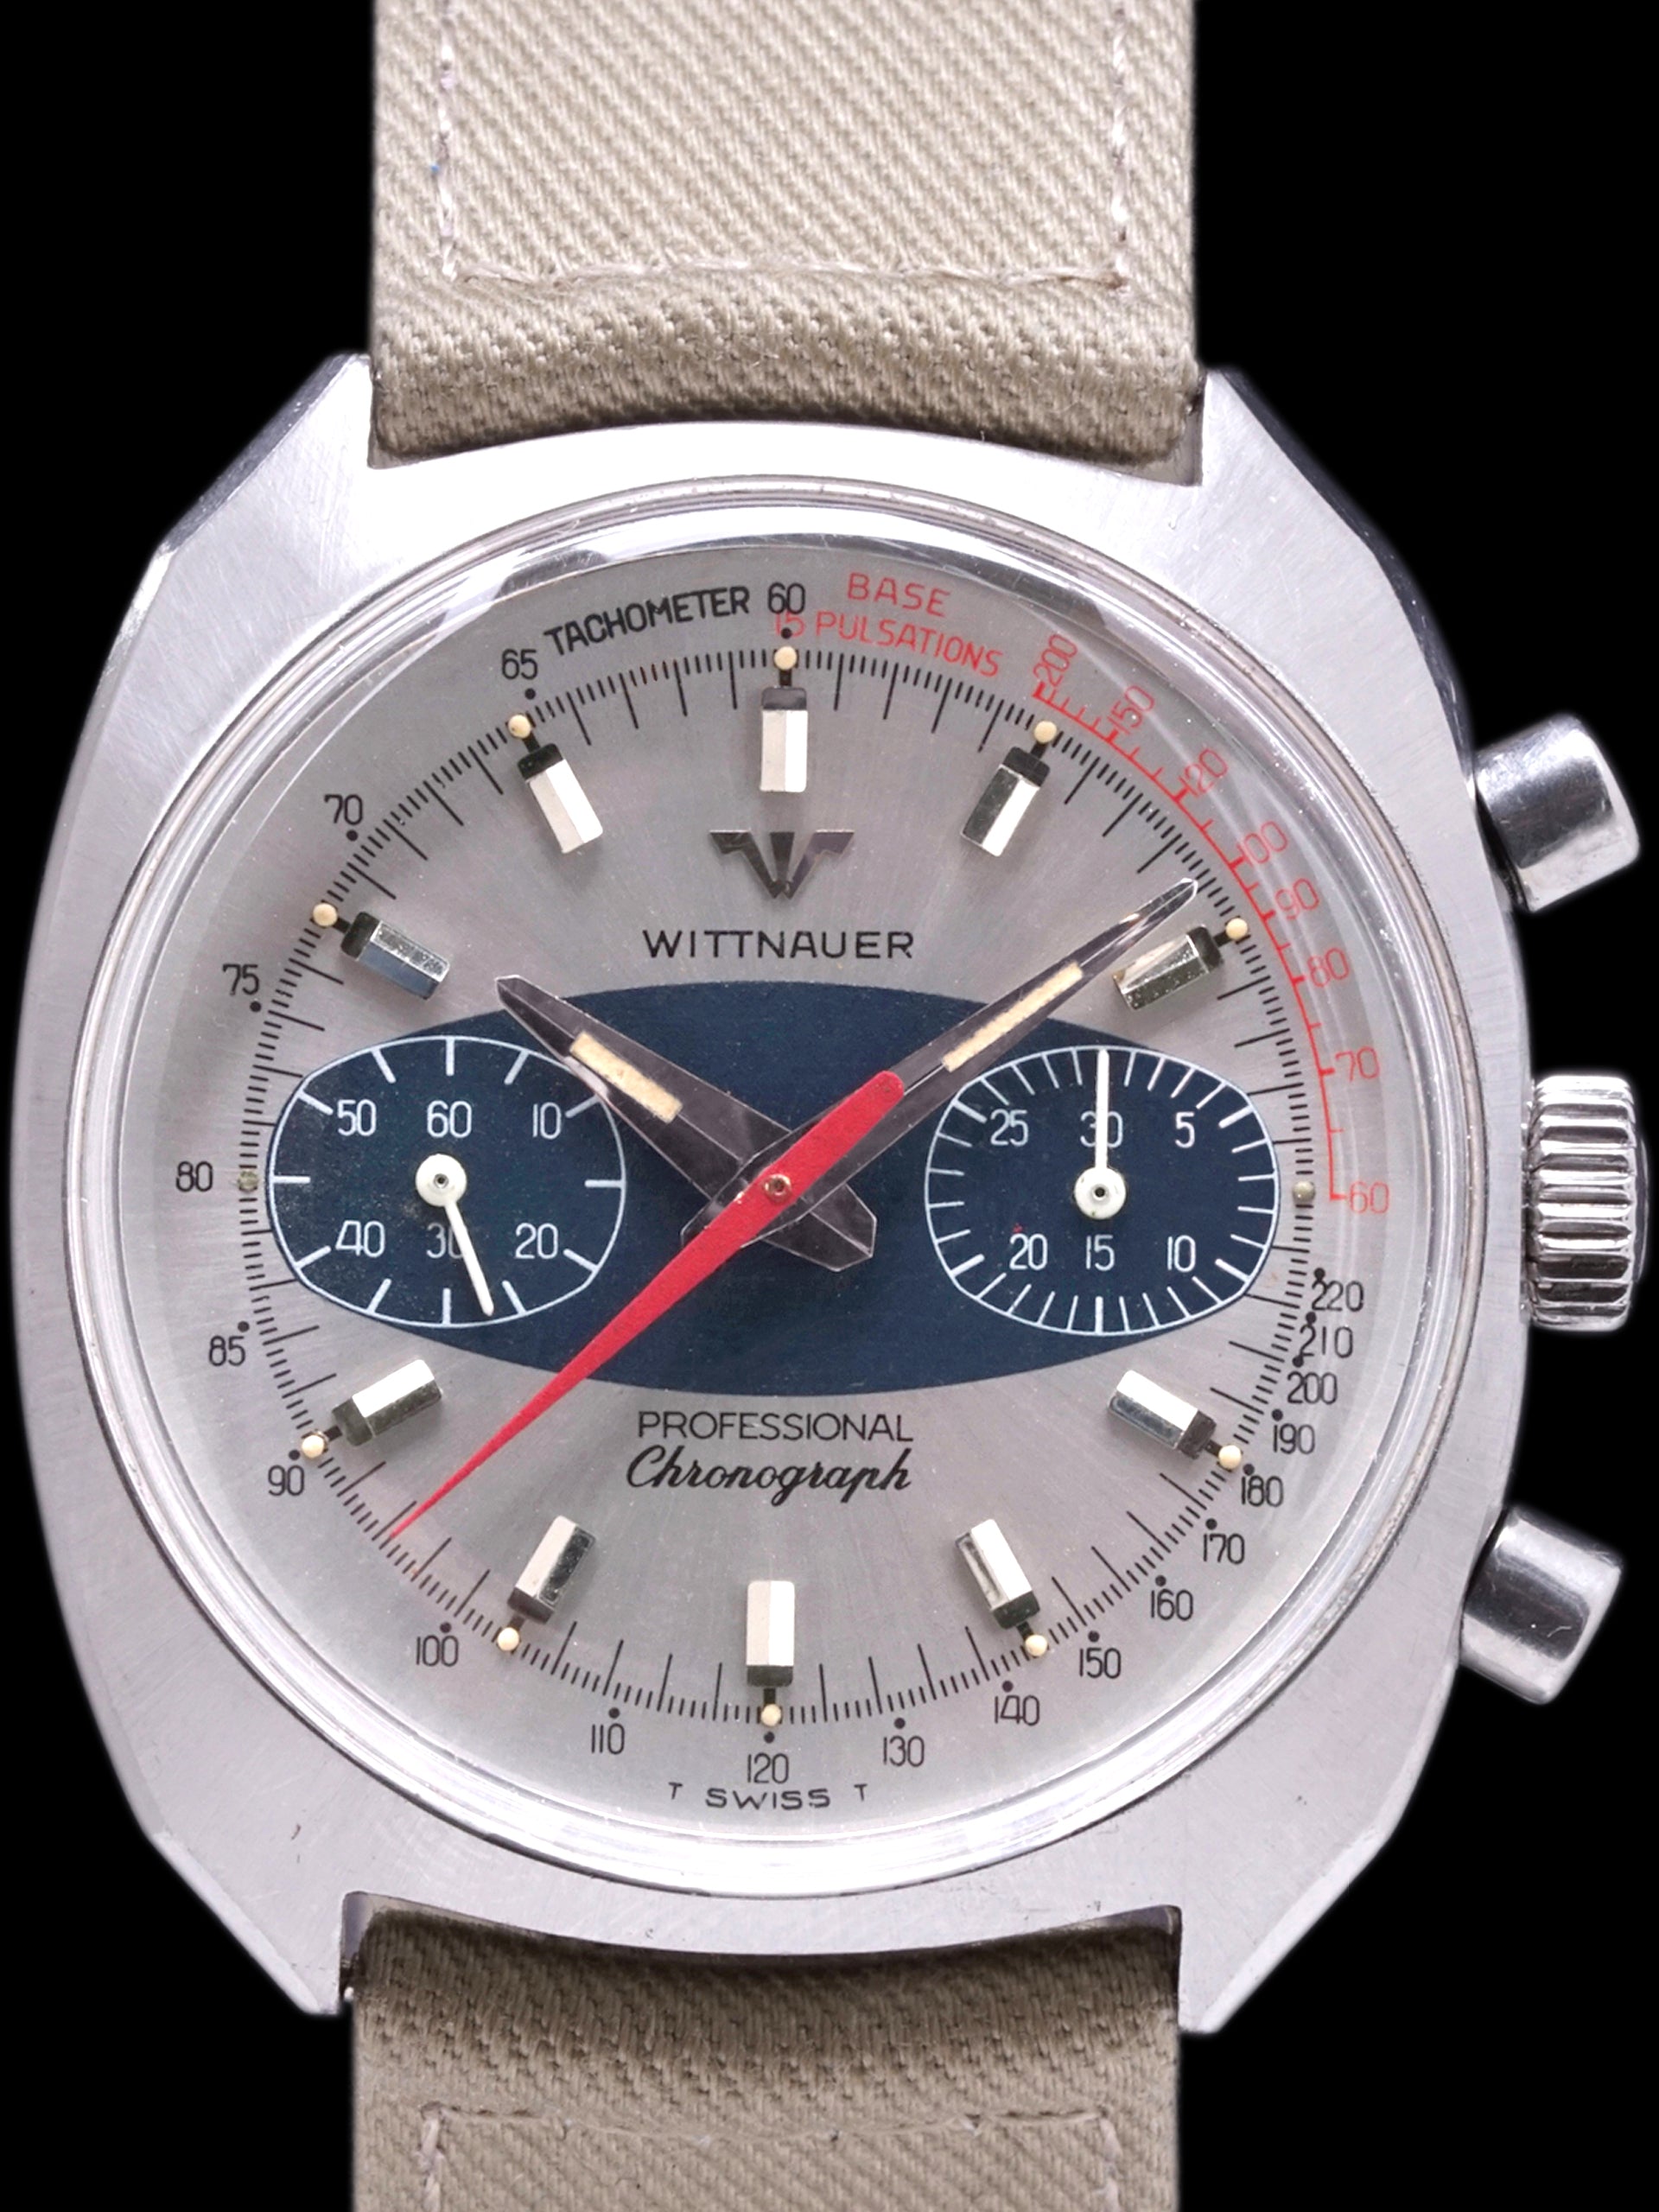 1960s Wittnauer Professional Chronograph (Ref. 247T) "Surfboard Dial"